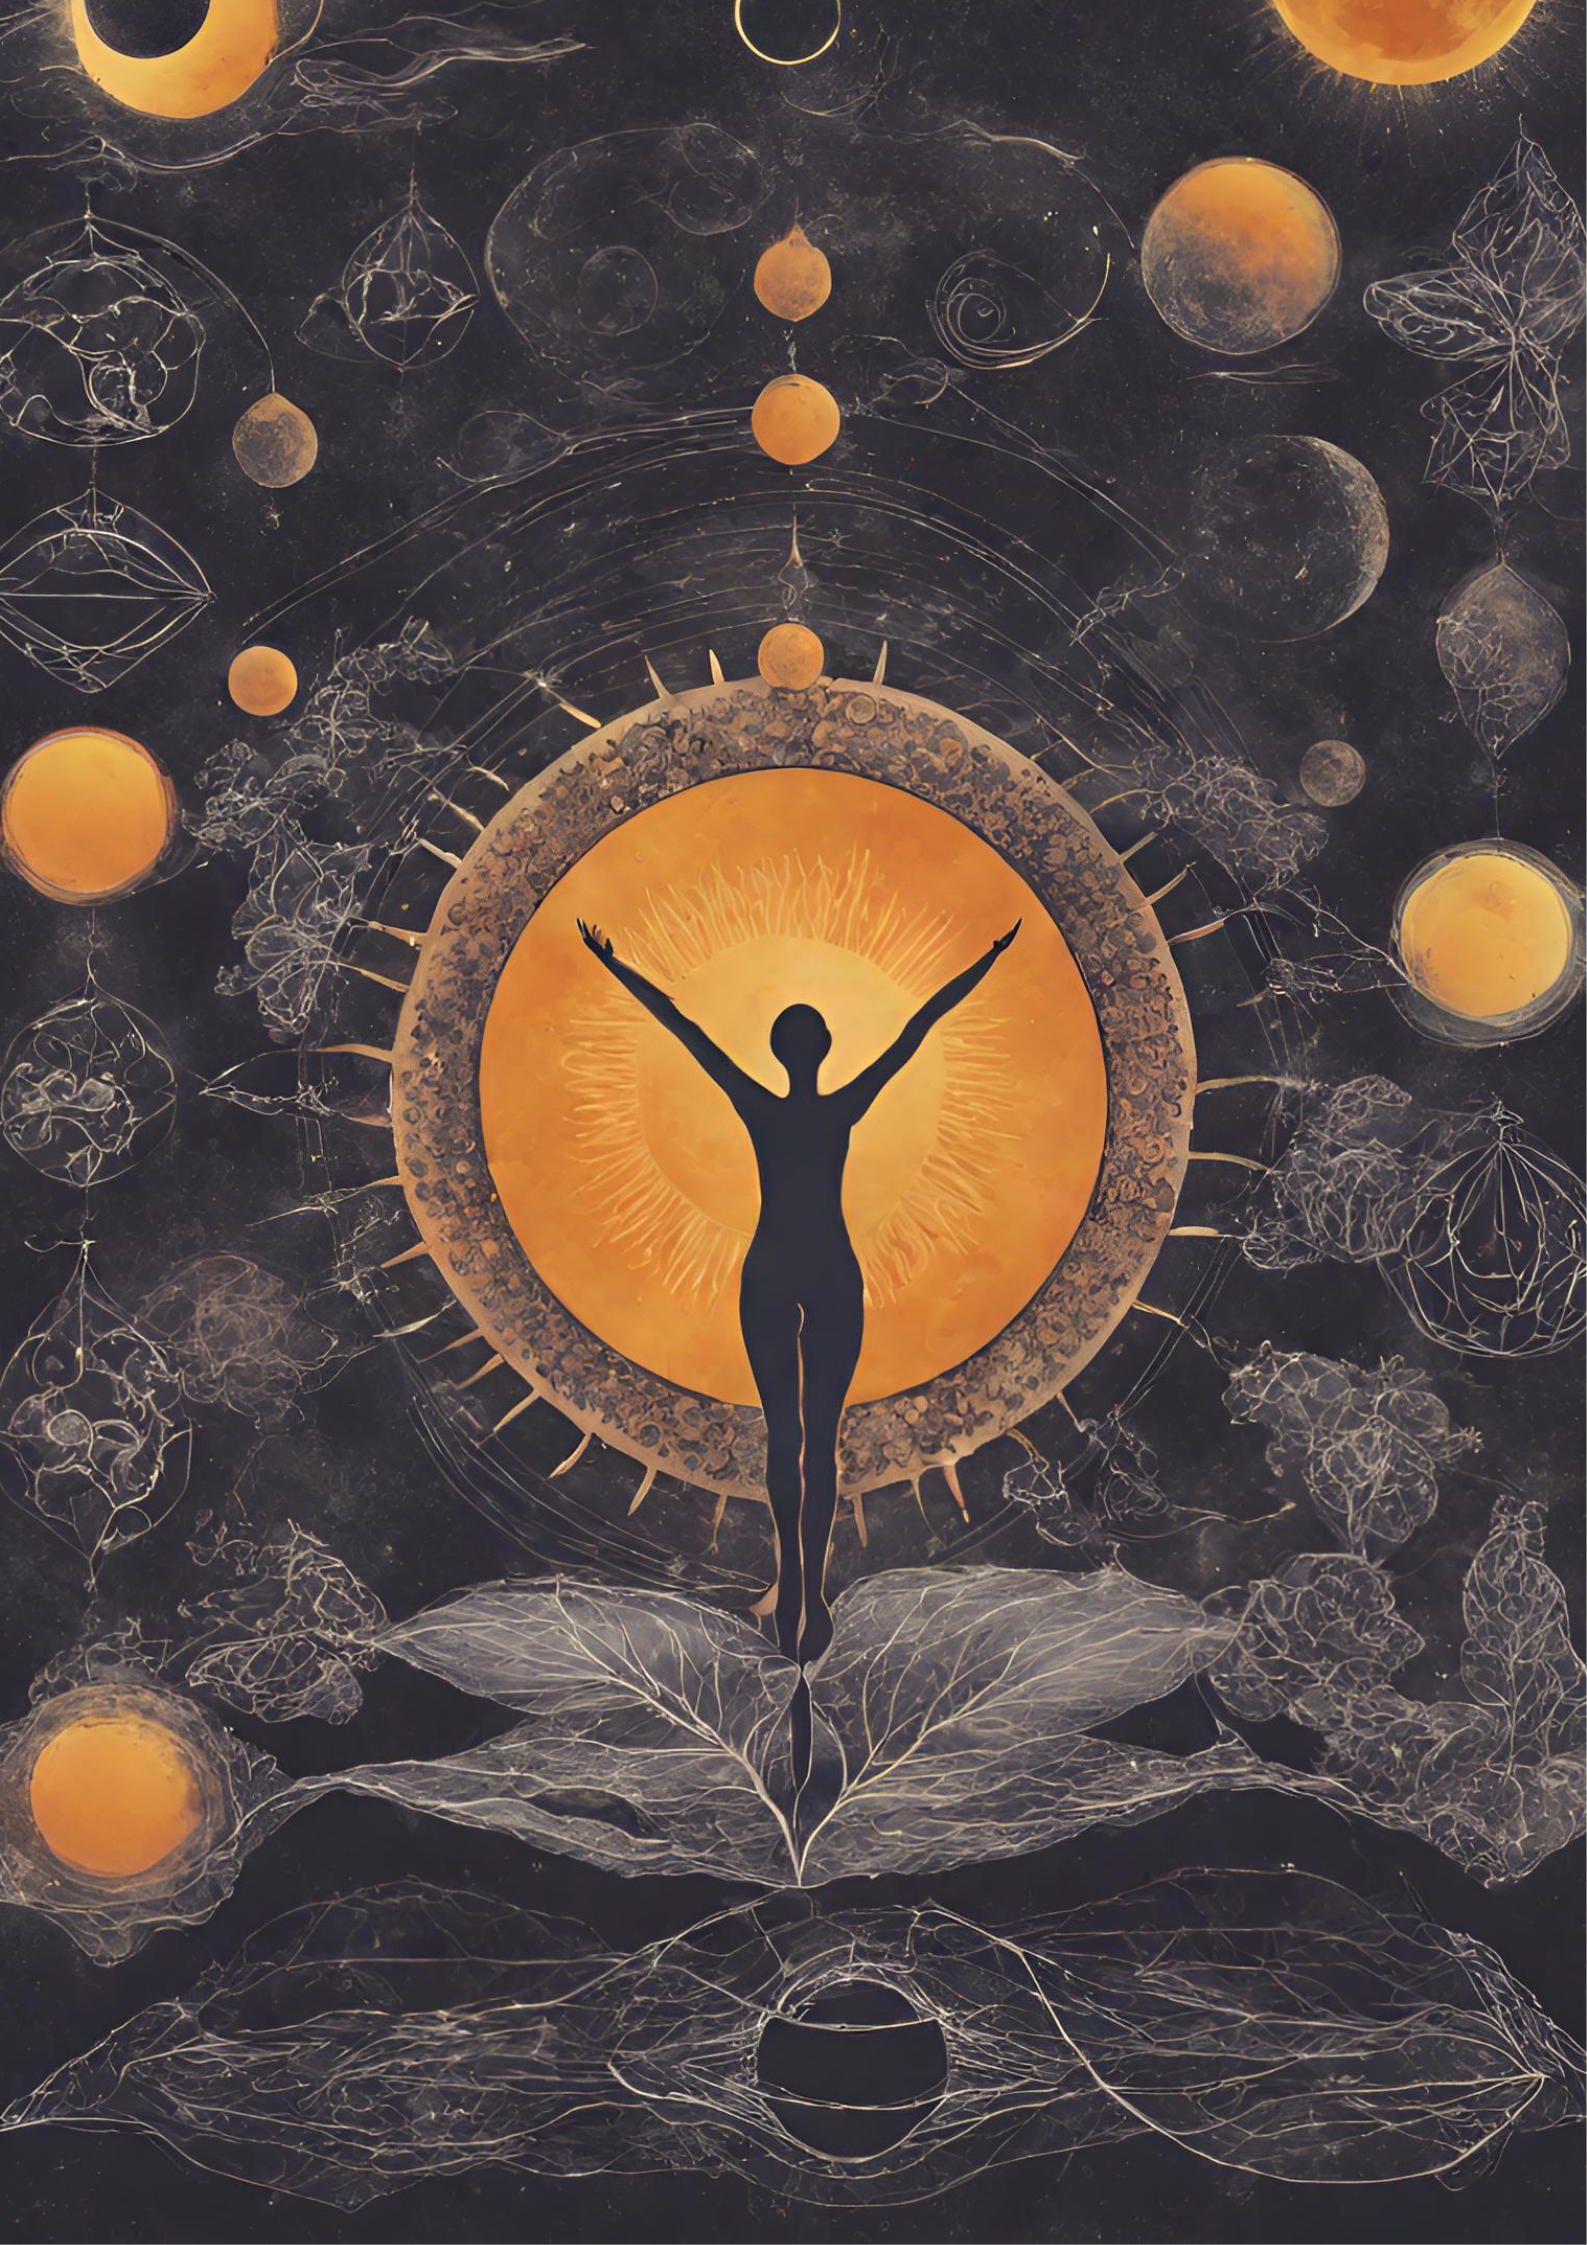 Eclipse Season, woman figure in front of a golden sun, surrounded by moons